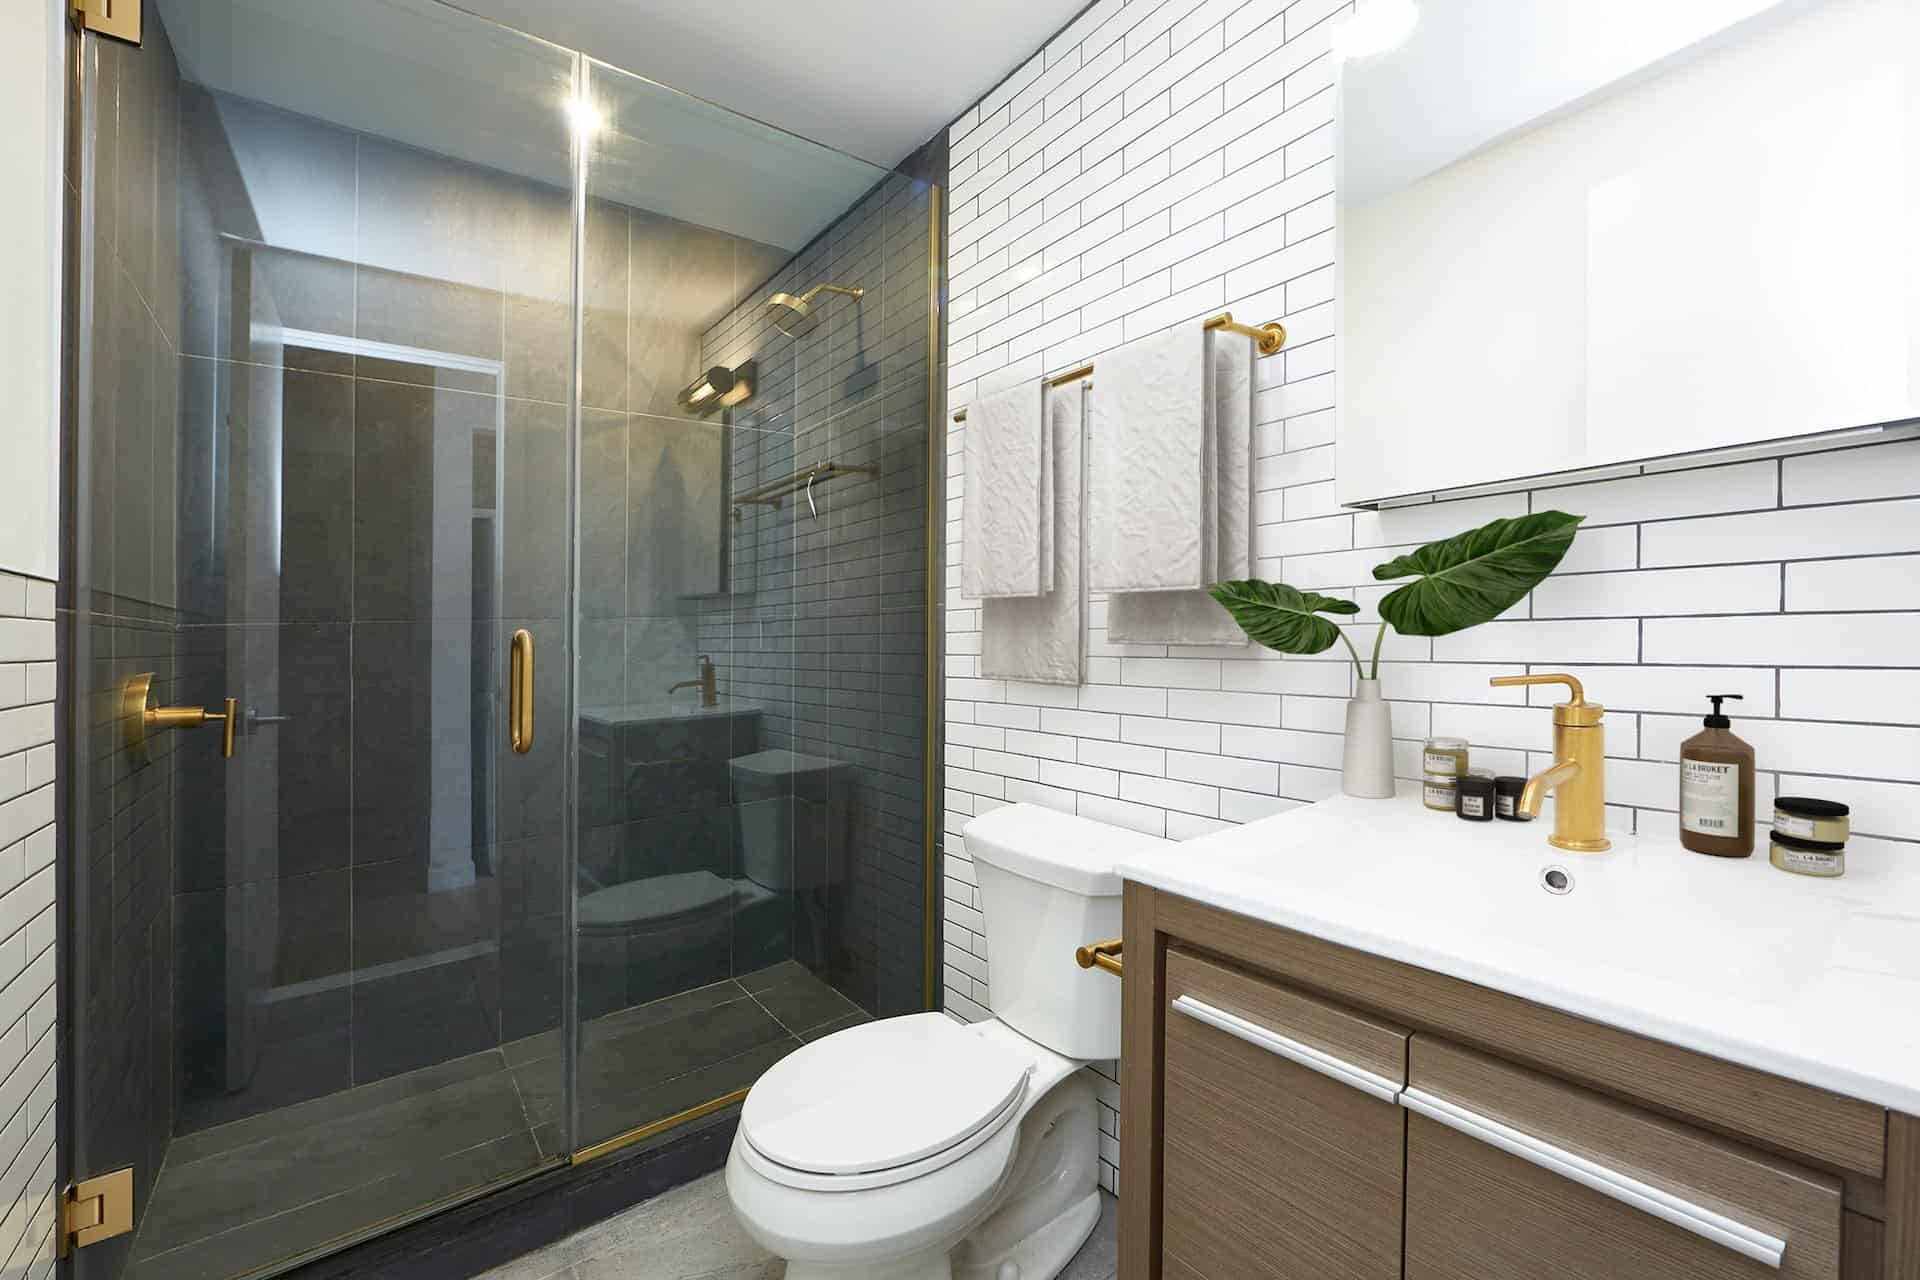 Bathroom at 634 East 11th Street apartments in New York. Tile walls, single vanity with rectangle mirror and walk-in shower.